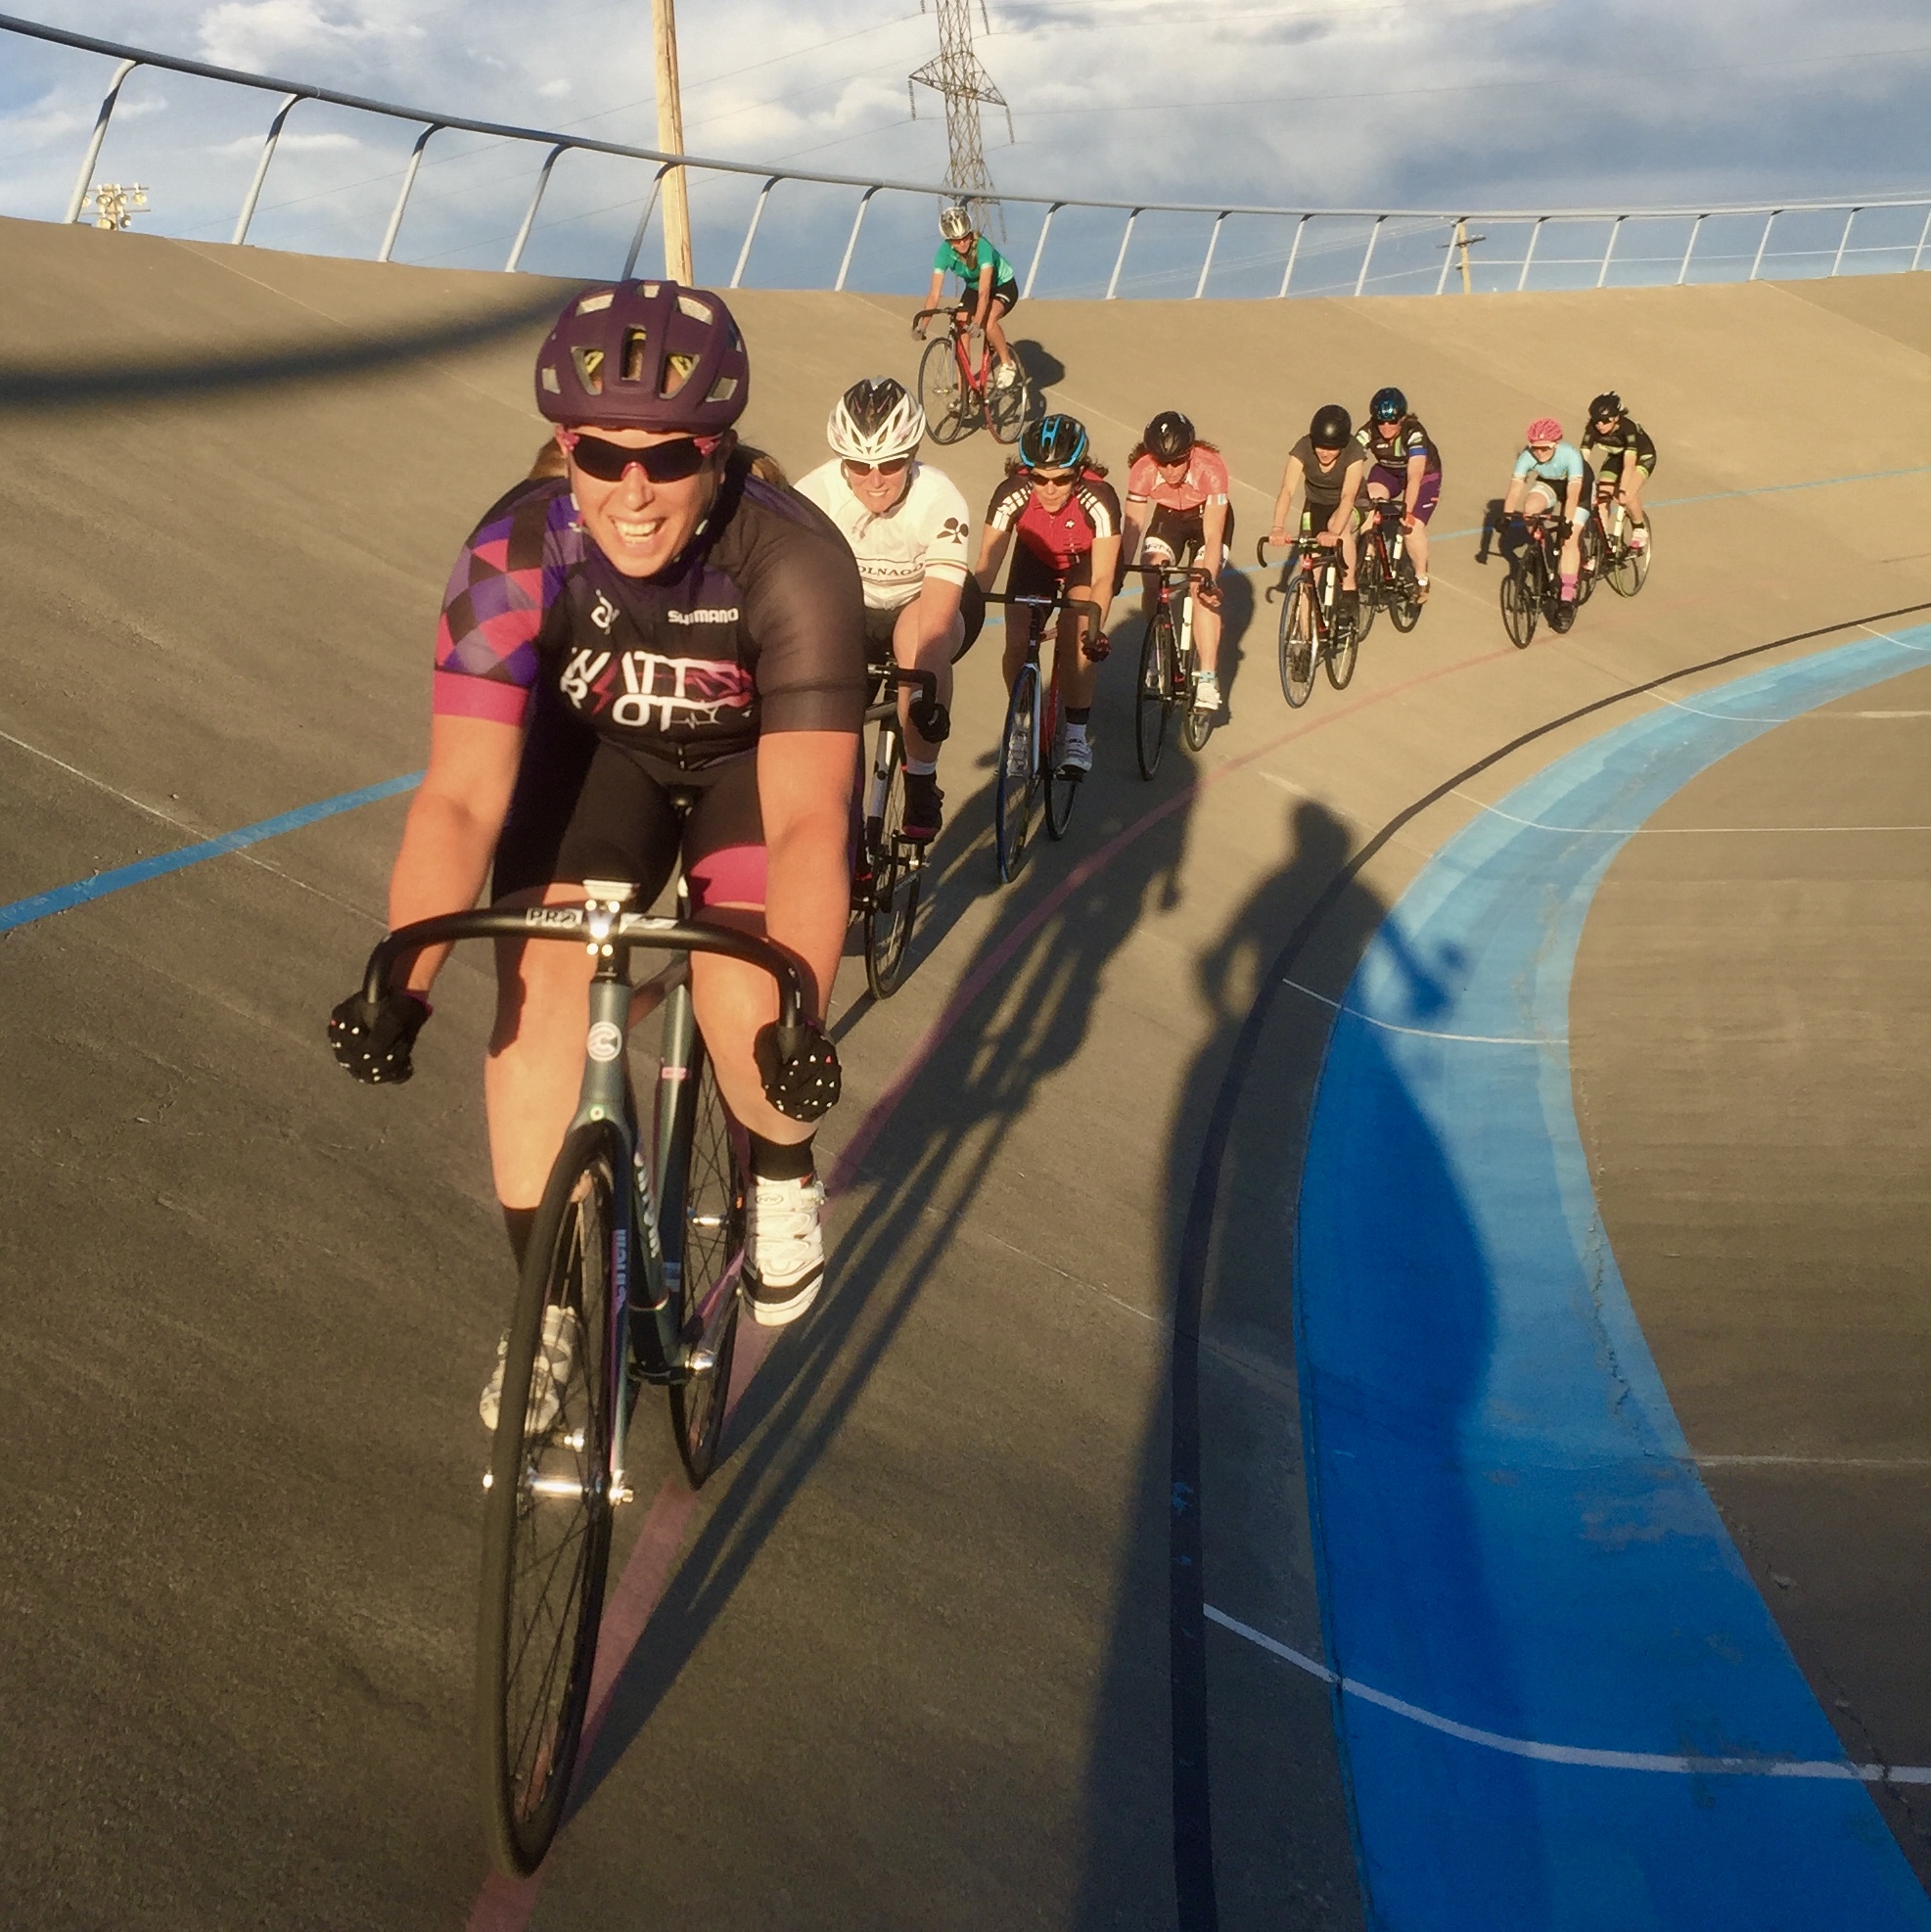 Kendra leading a group of women on bikes around the velodrome